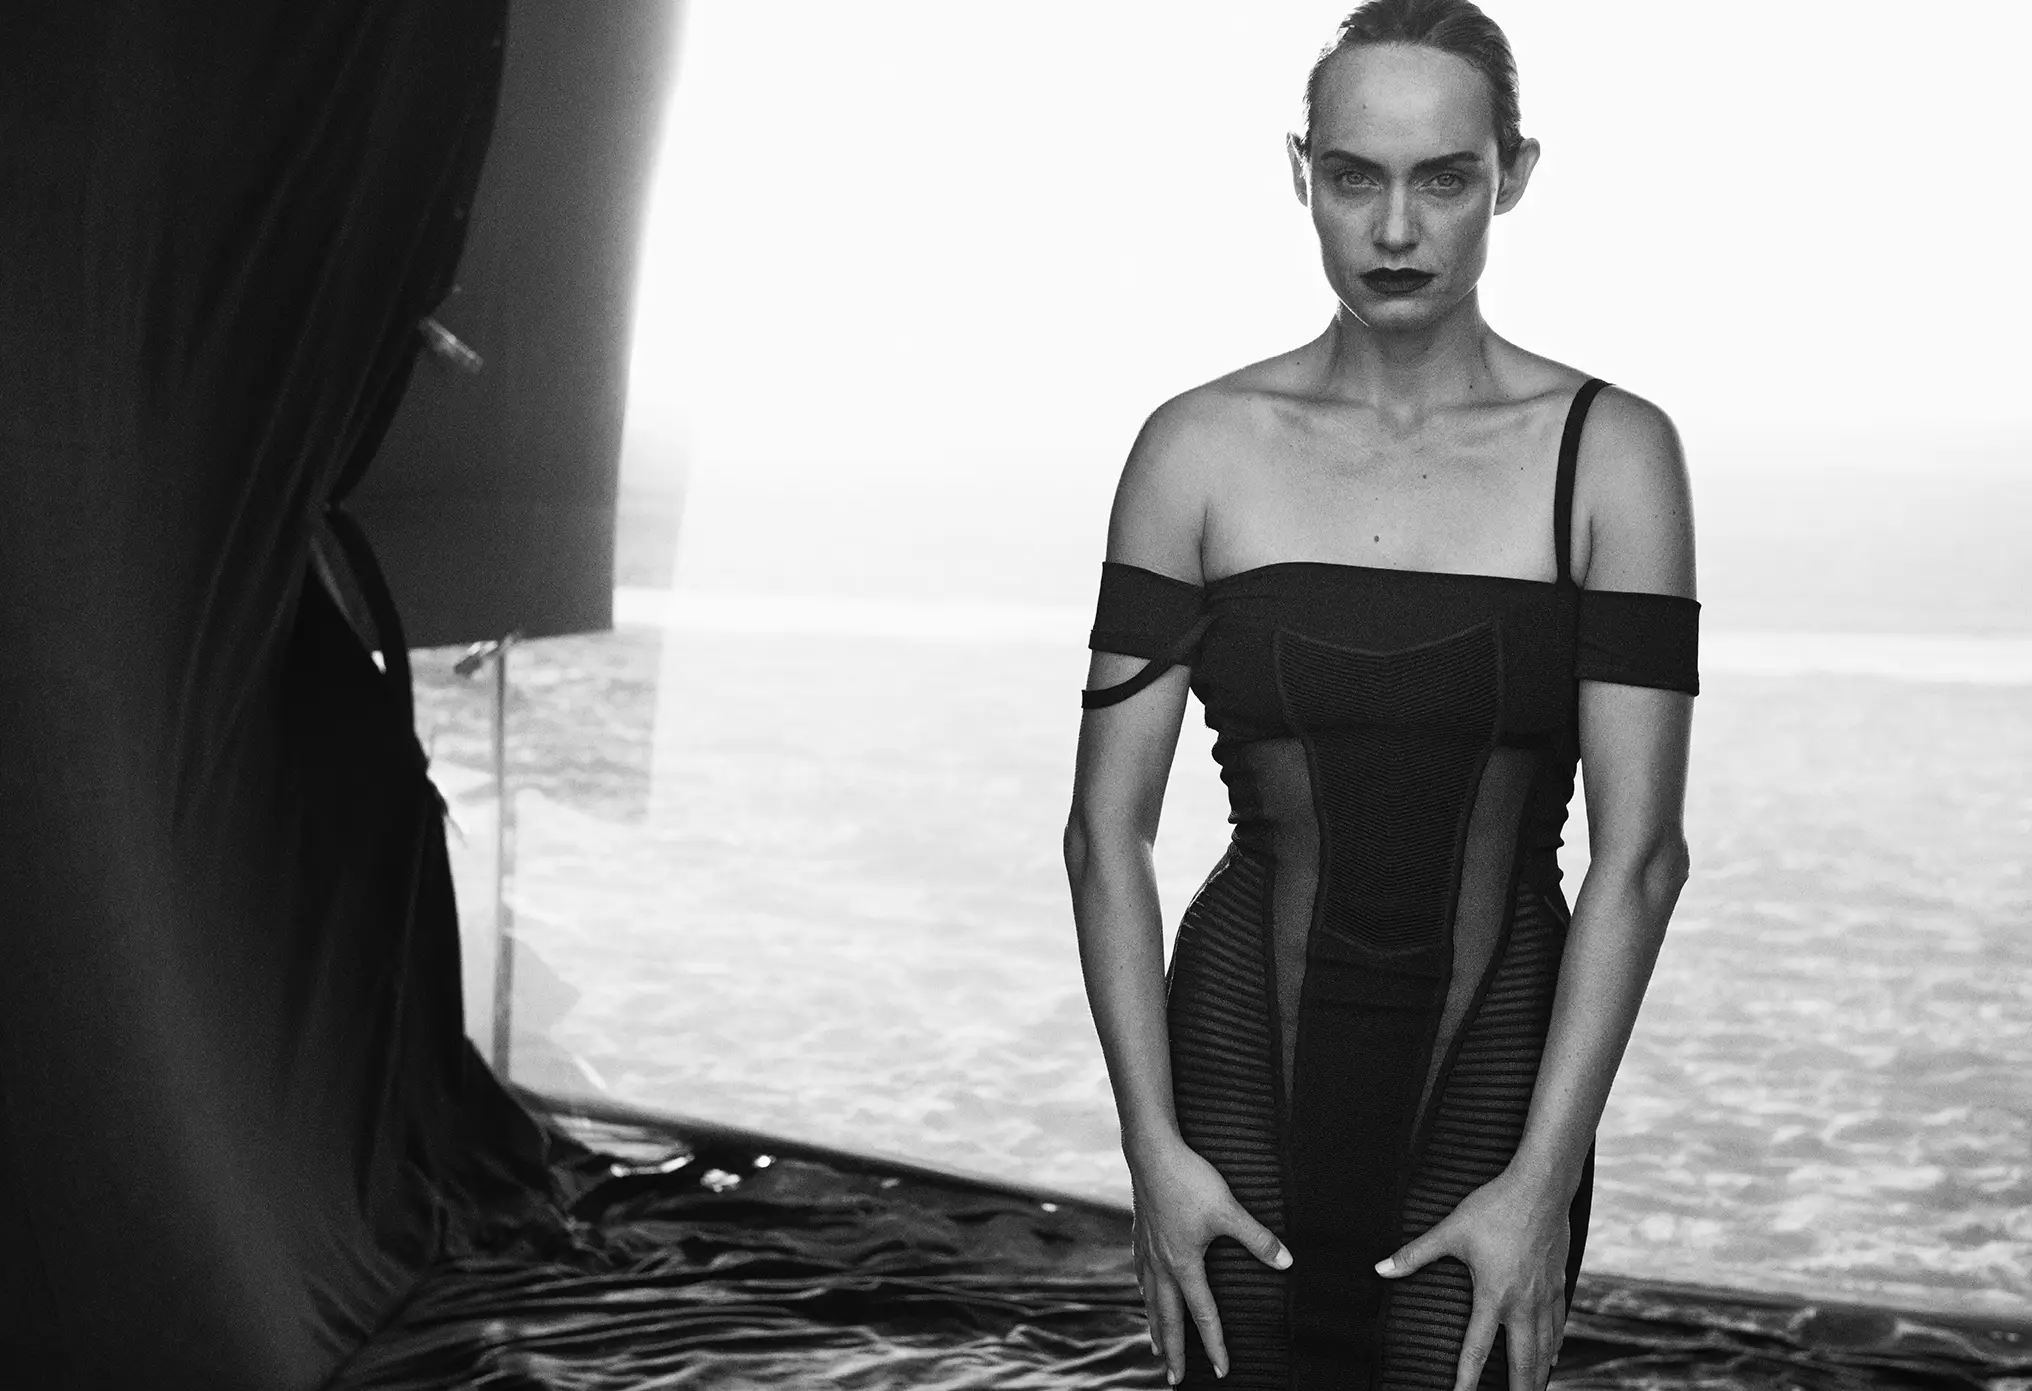 Amber Valetta by Peter Lindbergh for Vogue Italia February 2013.